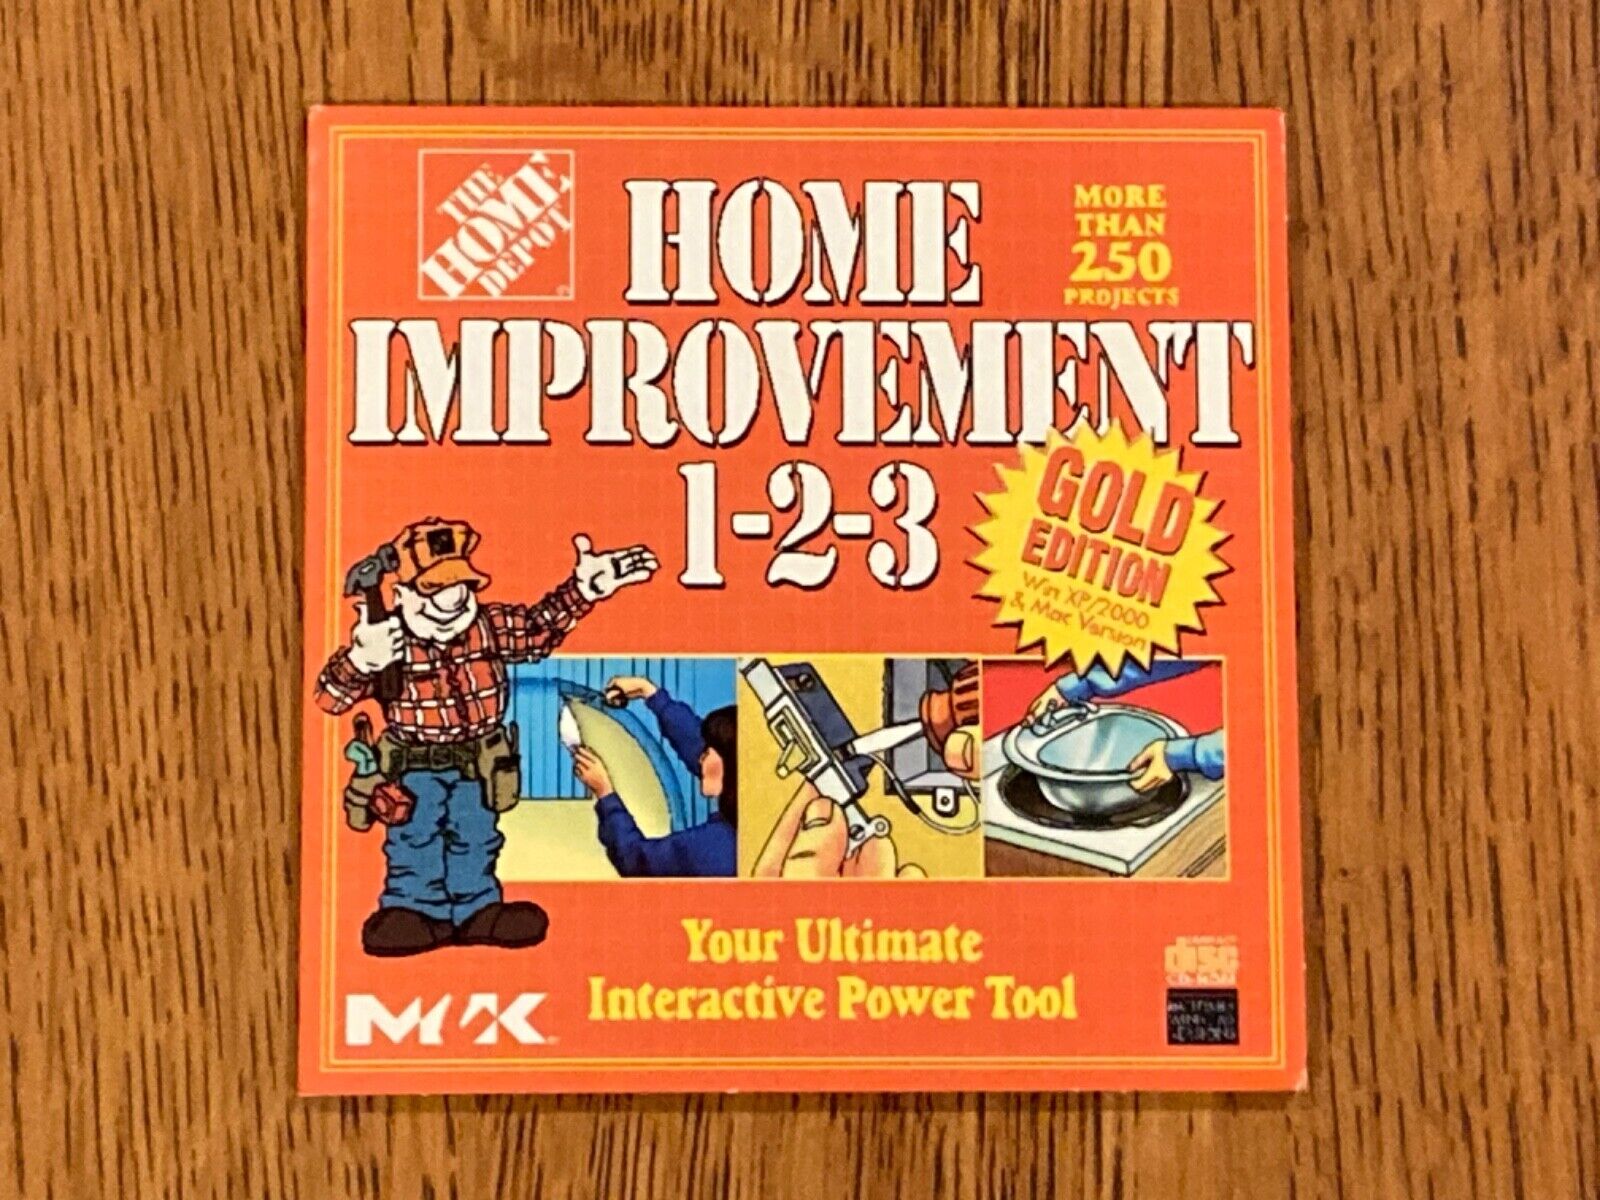 Home Improvement 1-2-3 CD (Gold Edition) The Home Depot